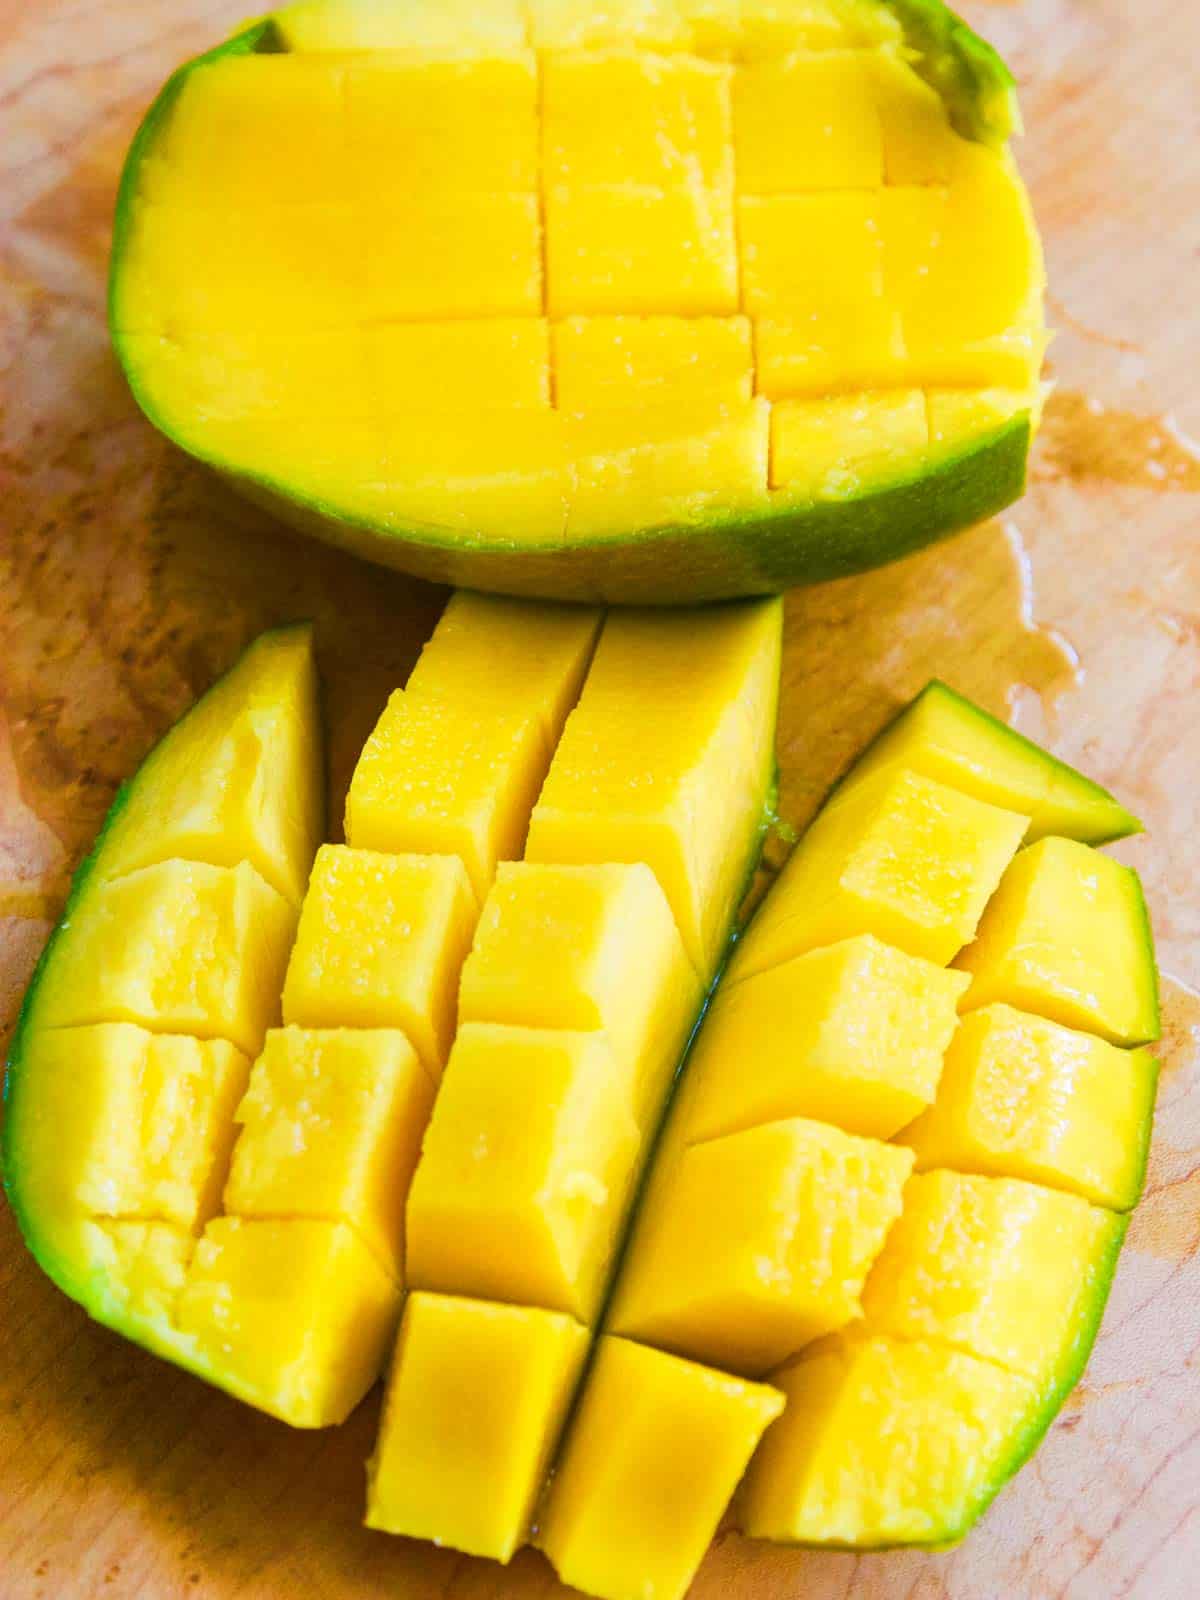 A perfectly cut open mango with cubes cut into the fruit.